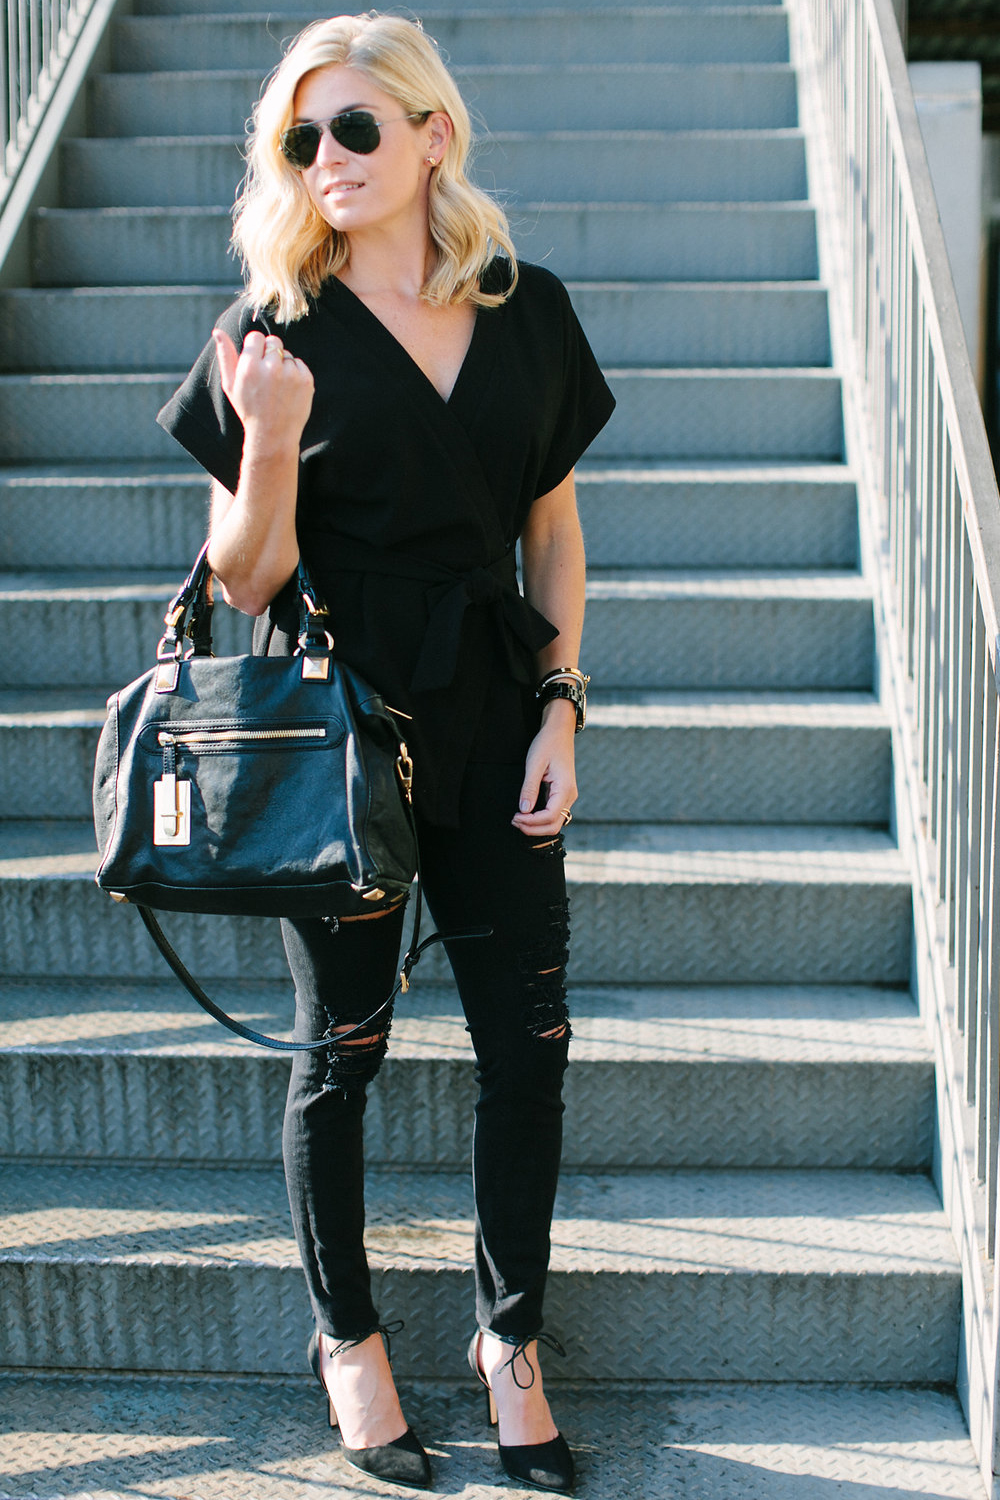 basic black outfit-all black outfit-black distressed jeans and top-dallas fashion blogger